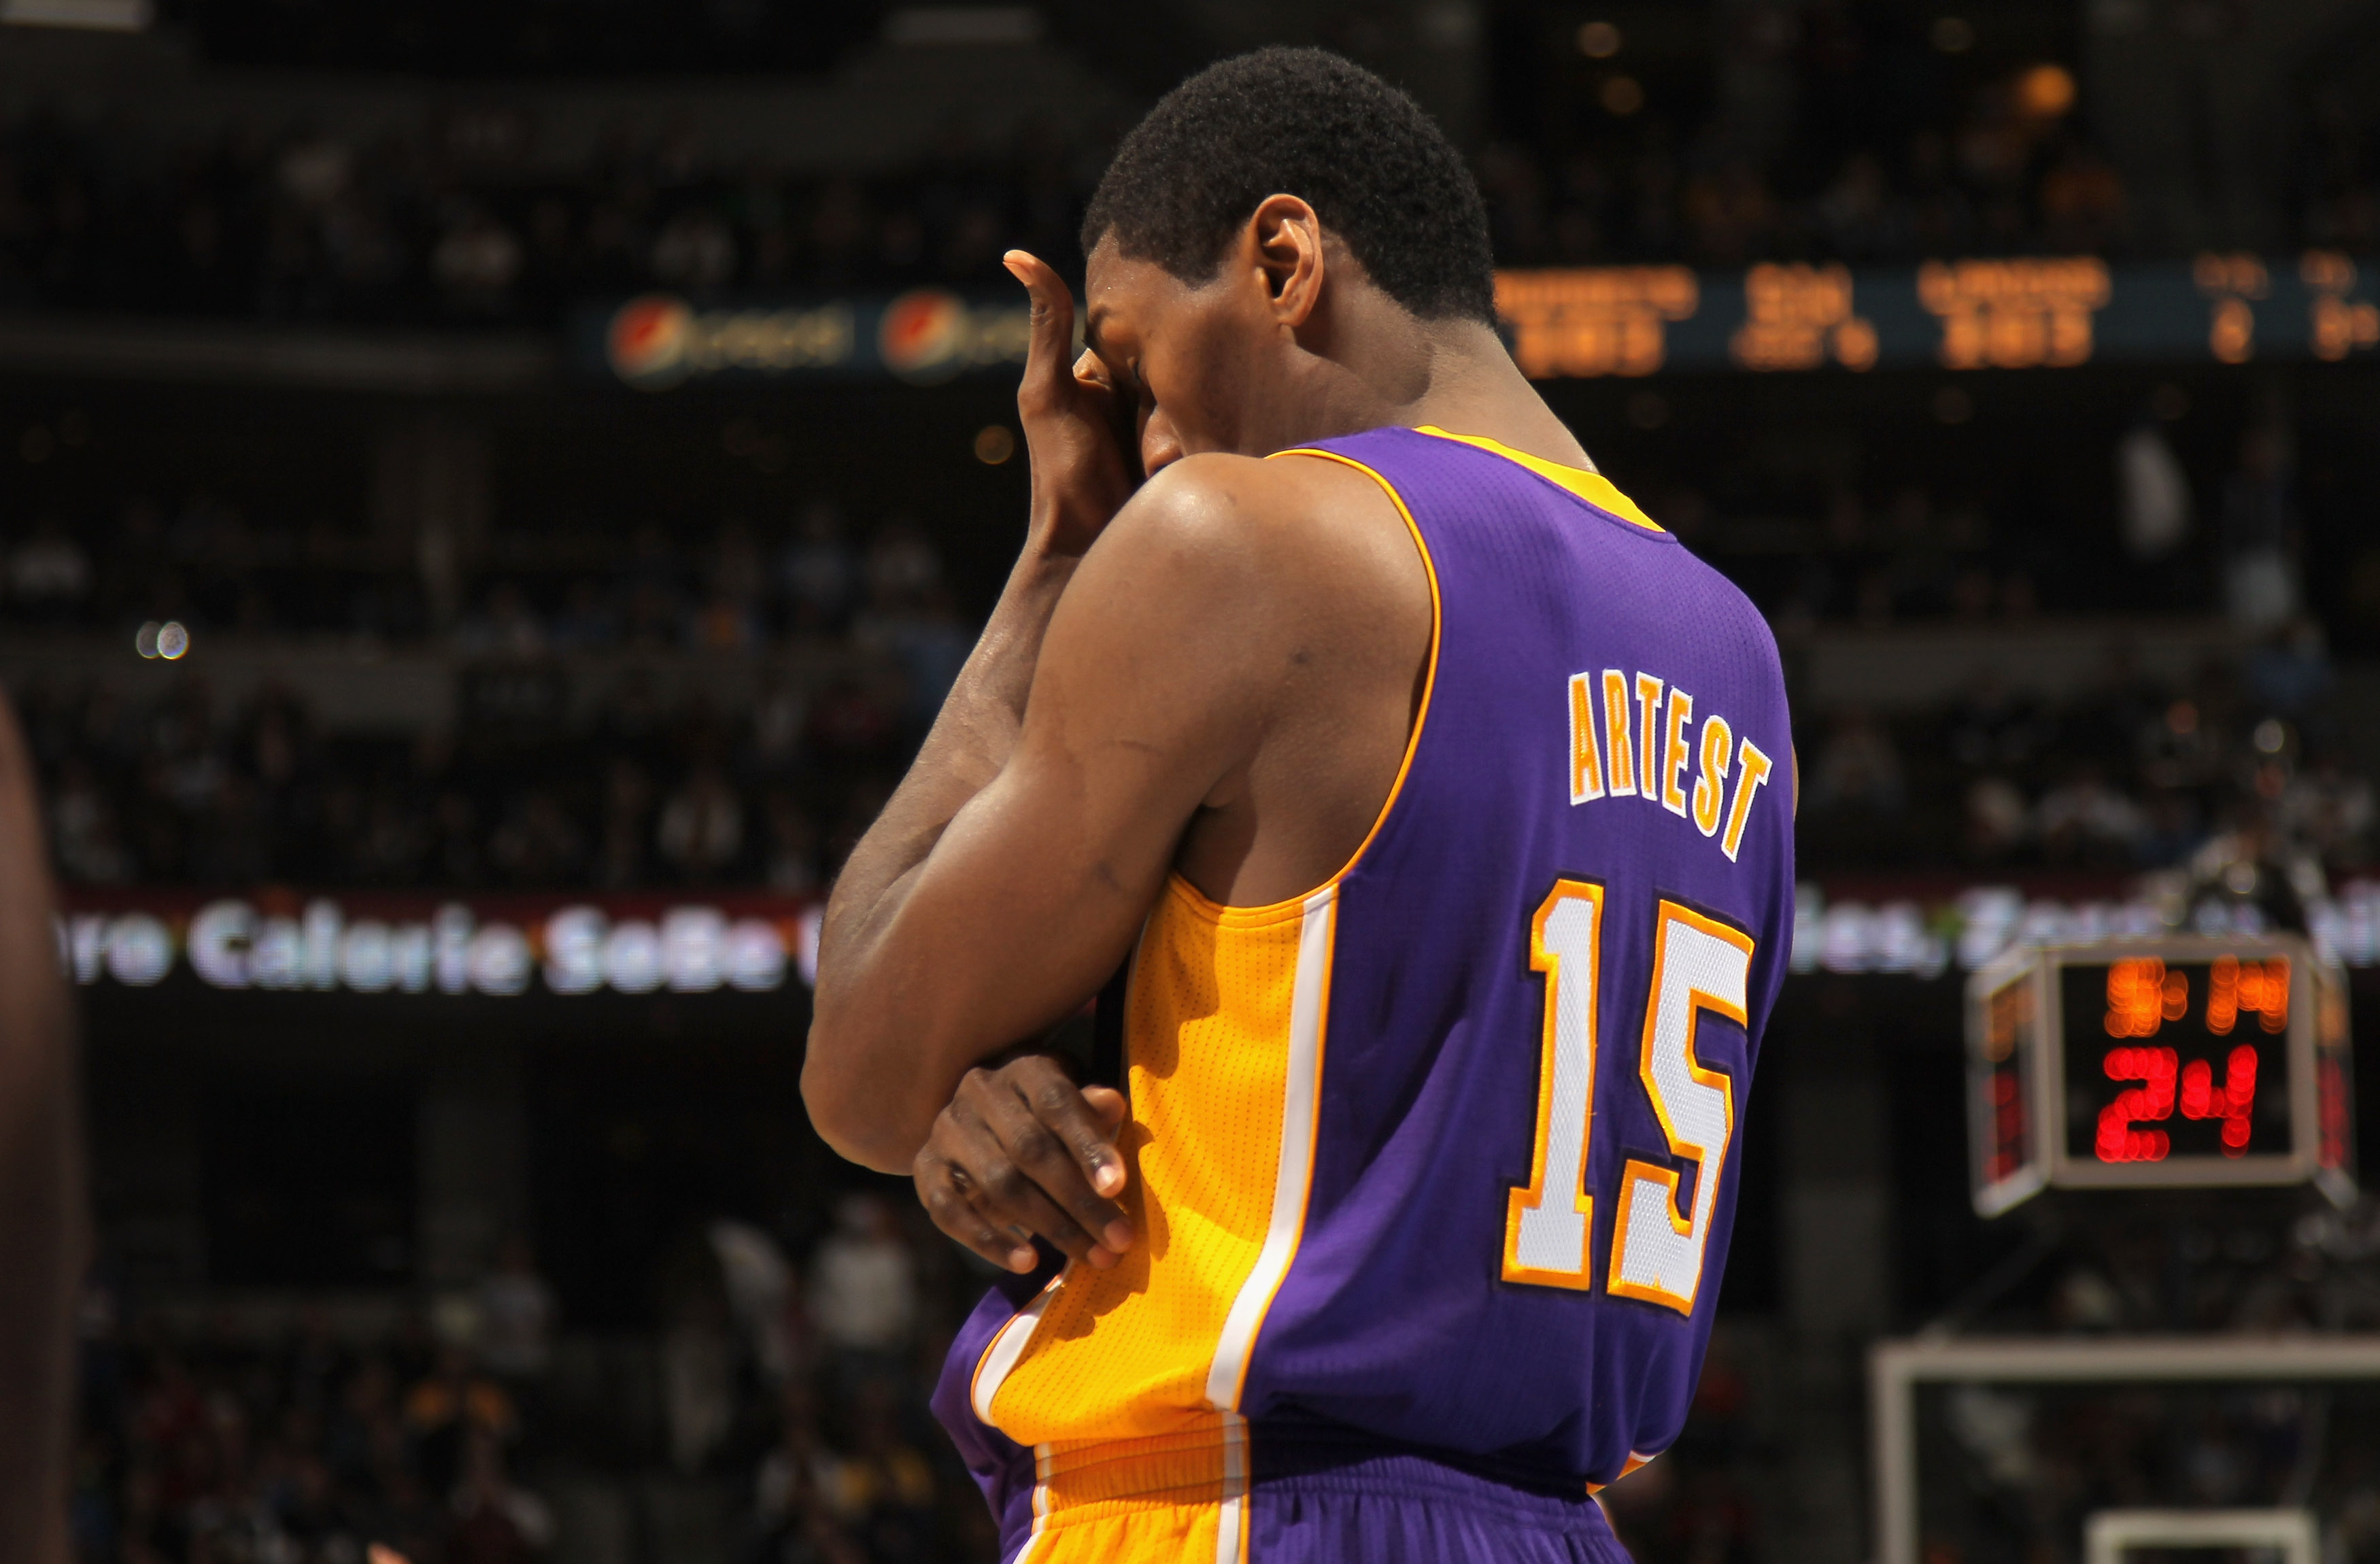 DENVER - NOVEMBER 11:  Ron Artest #15 of the Los Angeles Lakers reacts after being called for a foul against the Denver Nuggets at the Pepsi Center on November 11, 2010 in Denver, Colorado. The Nuggets defeated the Lakers 118-112.  NOTE TO USER: User expr